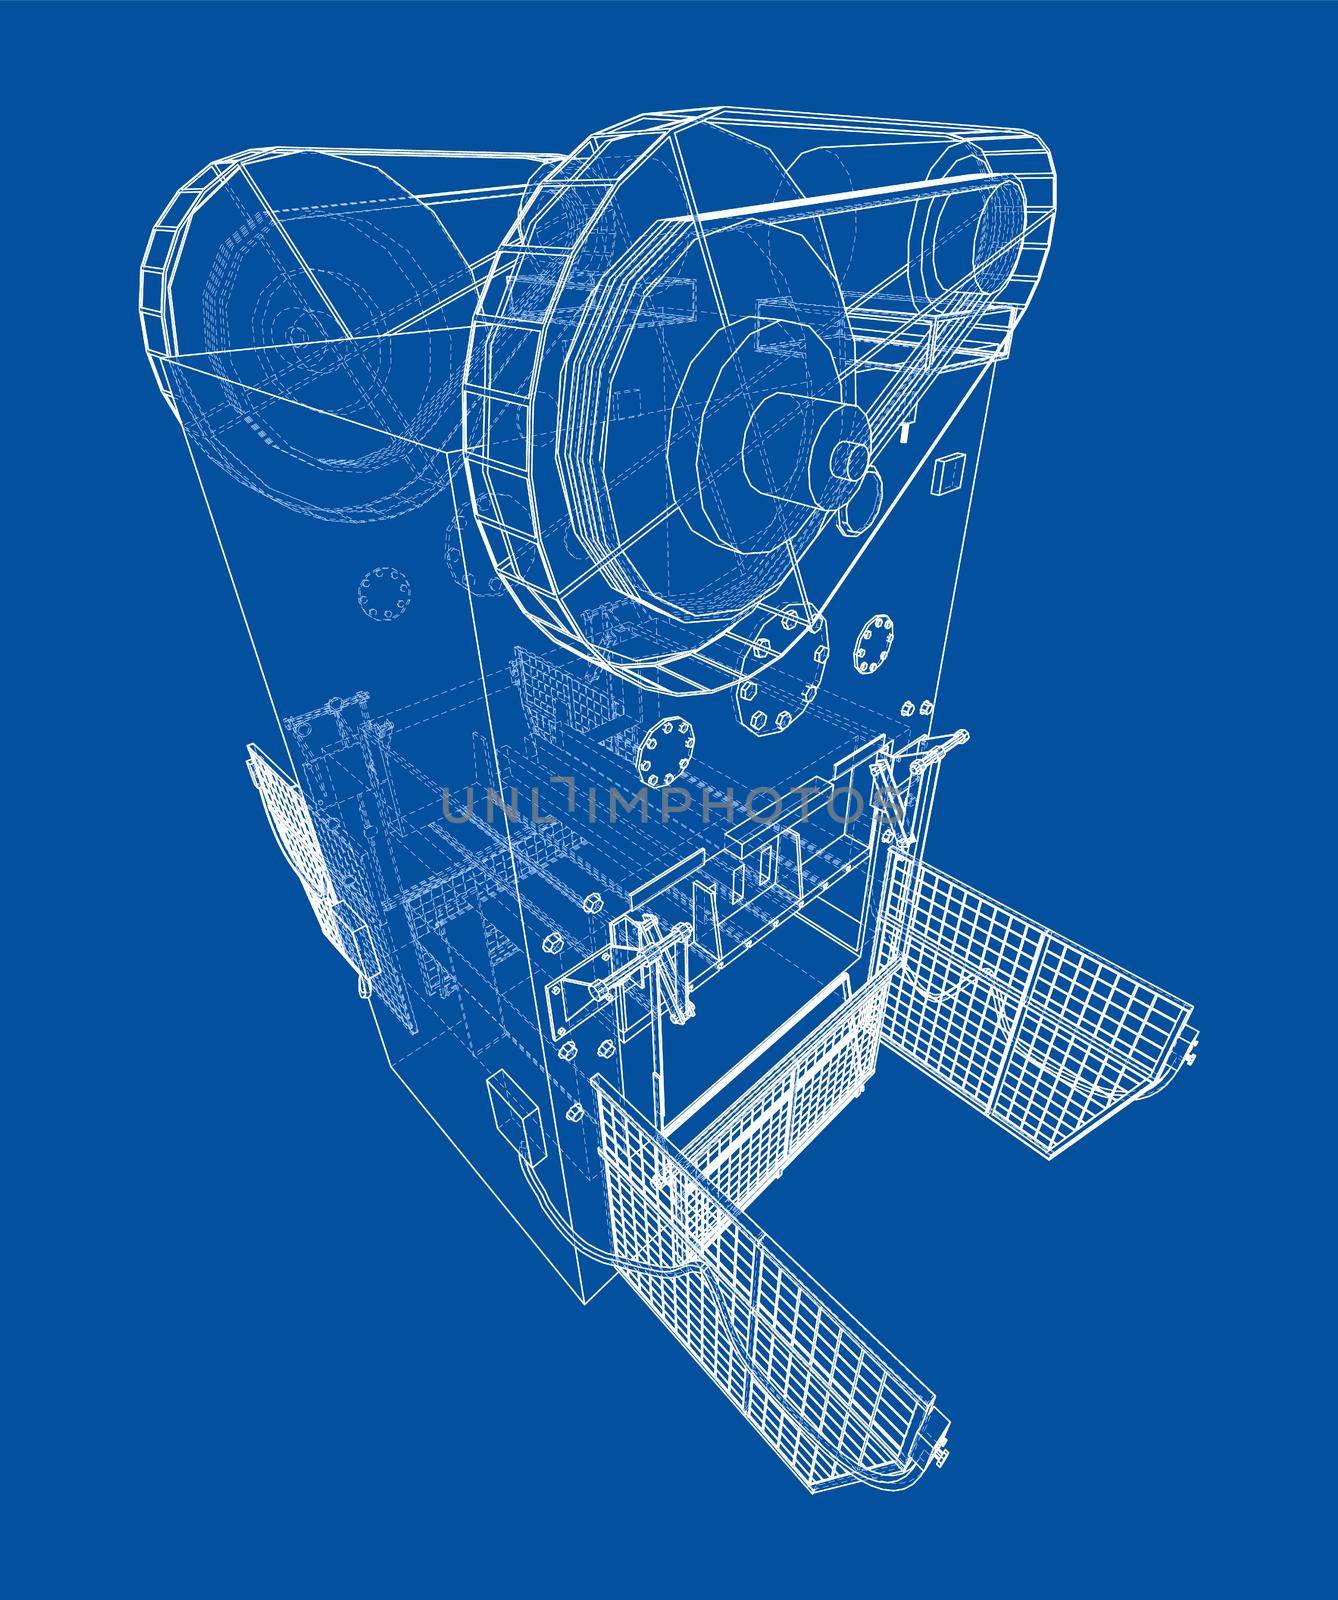 Powerful Press. 3d illustration. Wire-frame or blueprint style